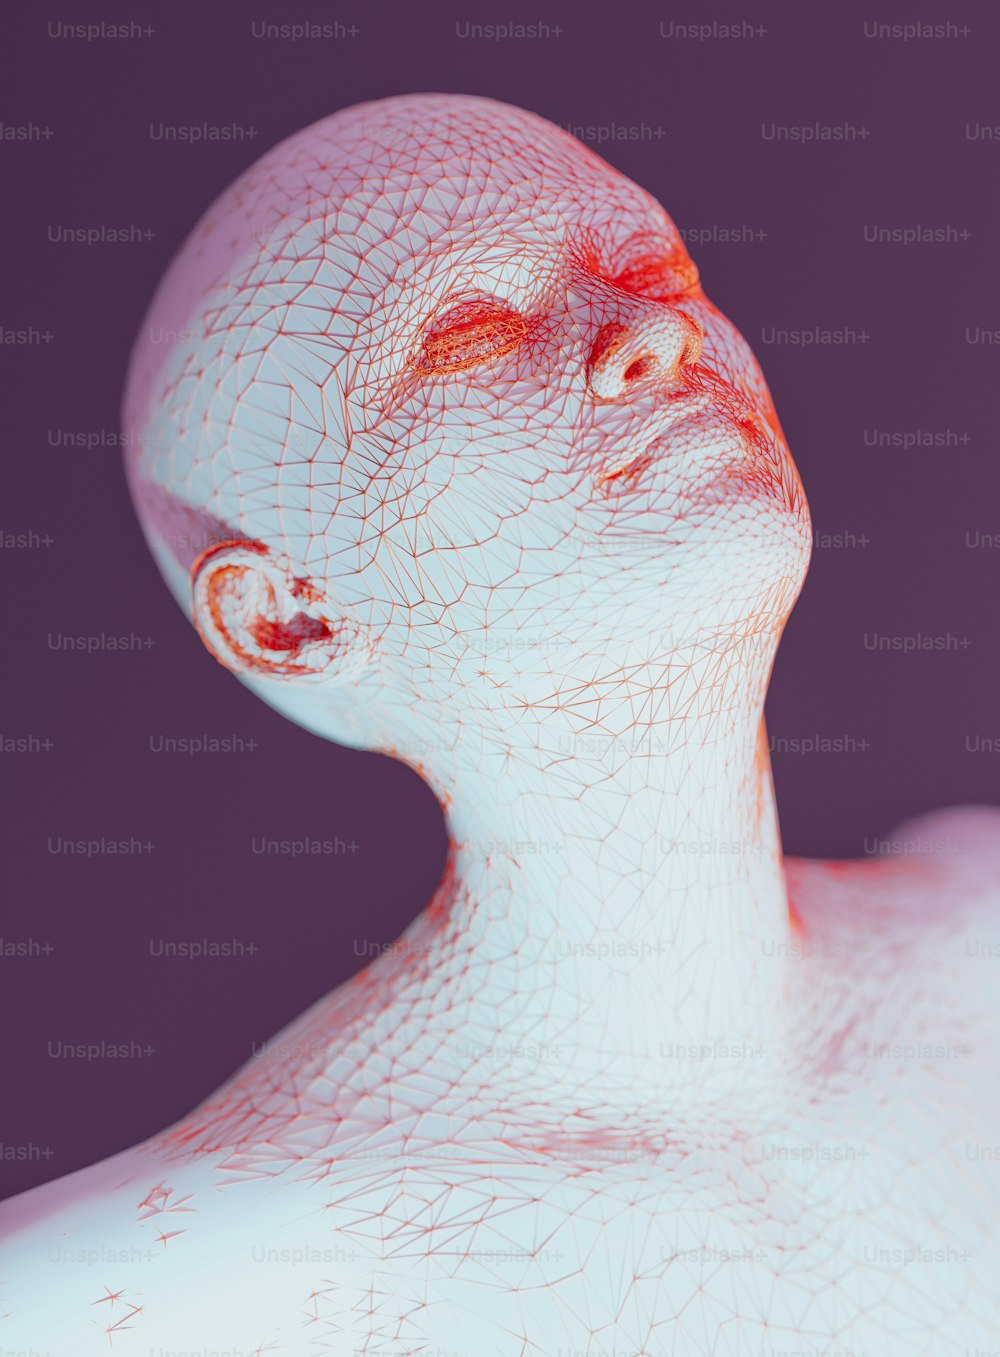 a 3d image of a man's head with his eyes closed